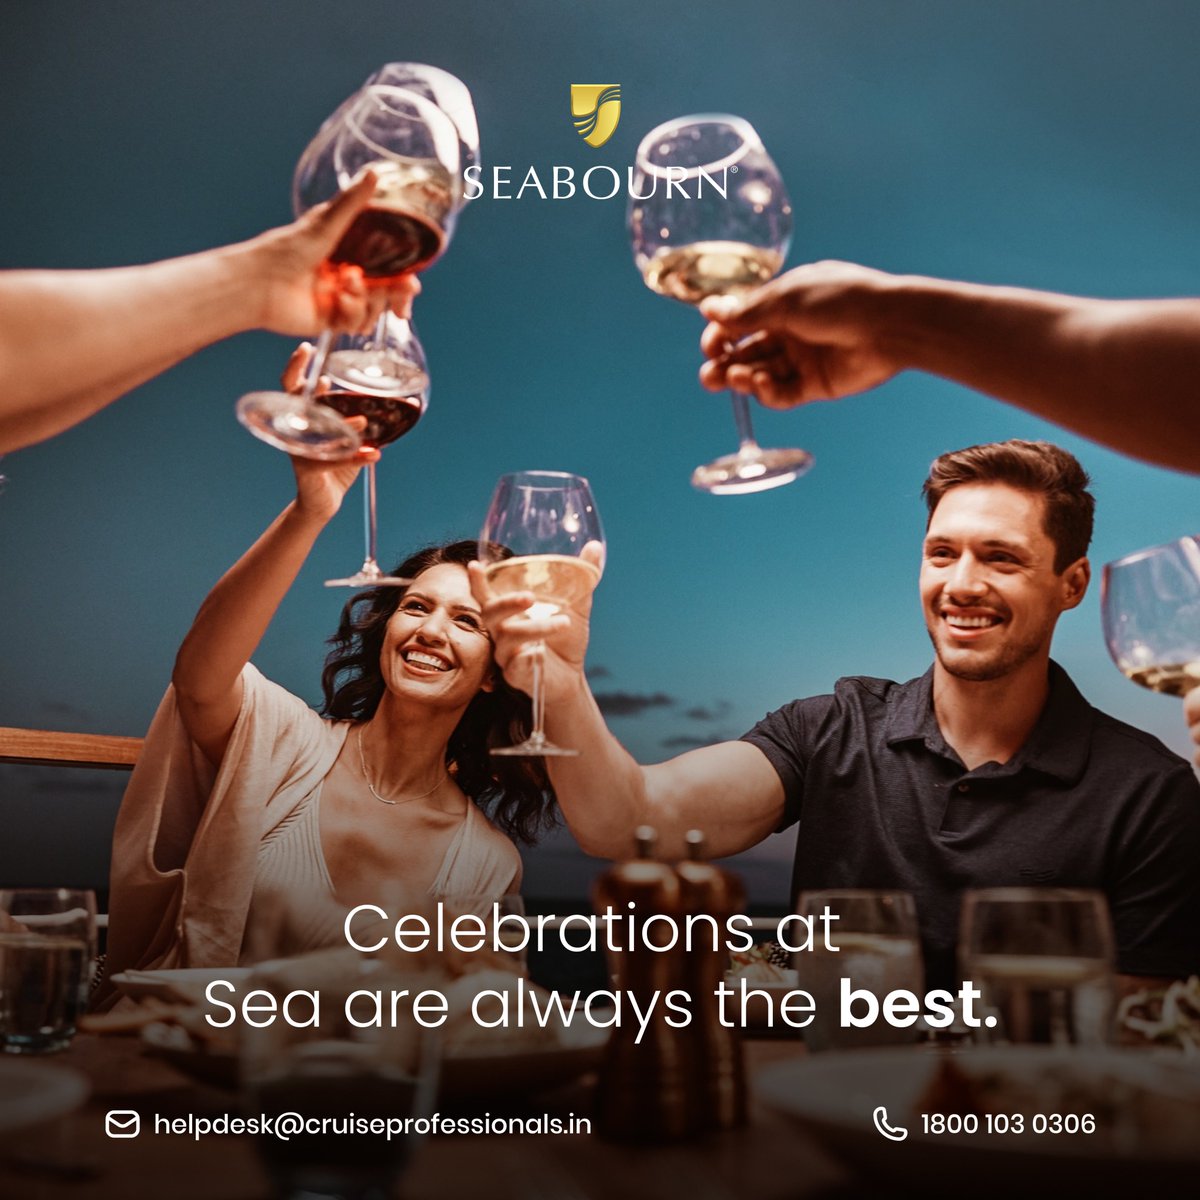 Celebrations at Sea are always the best, especially when they are celebrated with Seabourn.

#seabourn #cruiseprofessionals #luxurytravel #seabournmoments #seastheday #cruising #celebrations